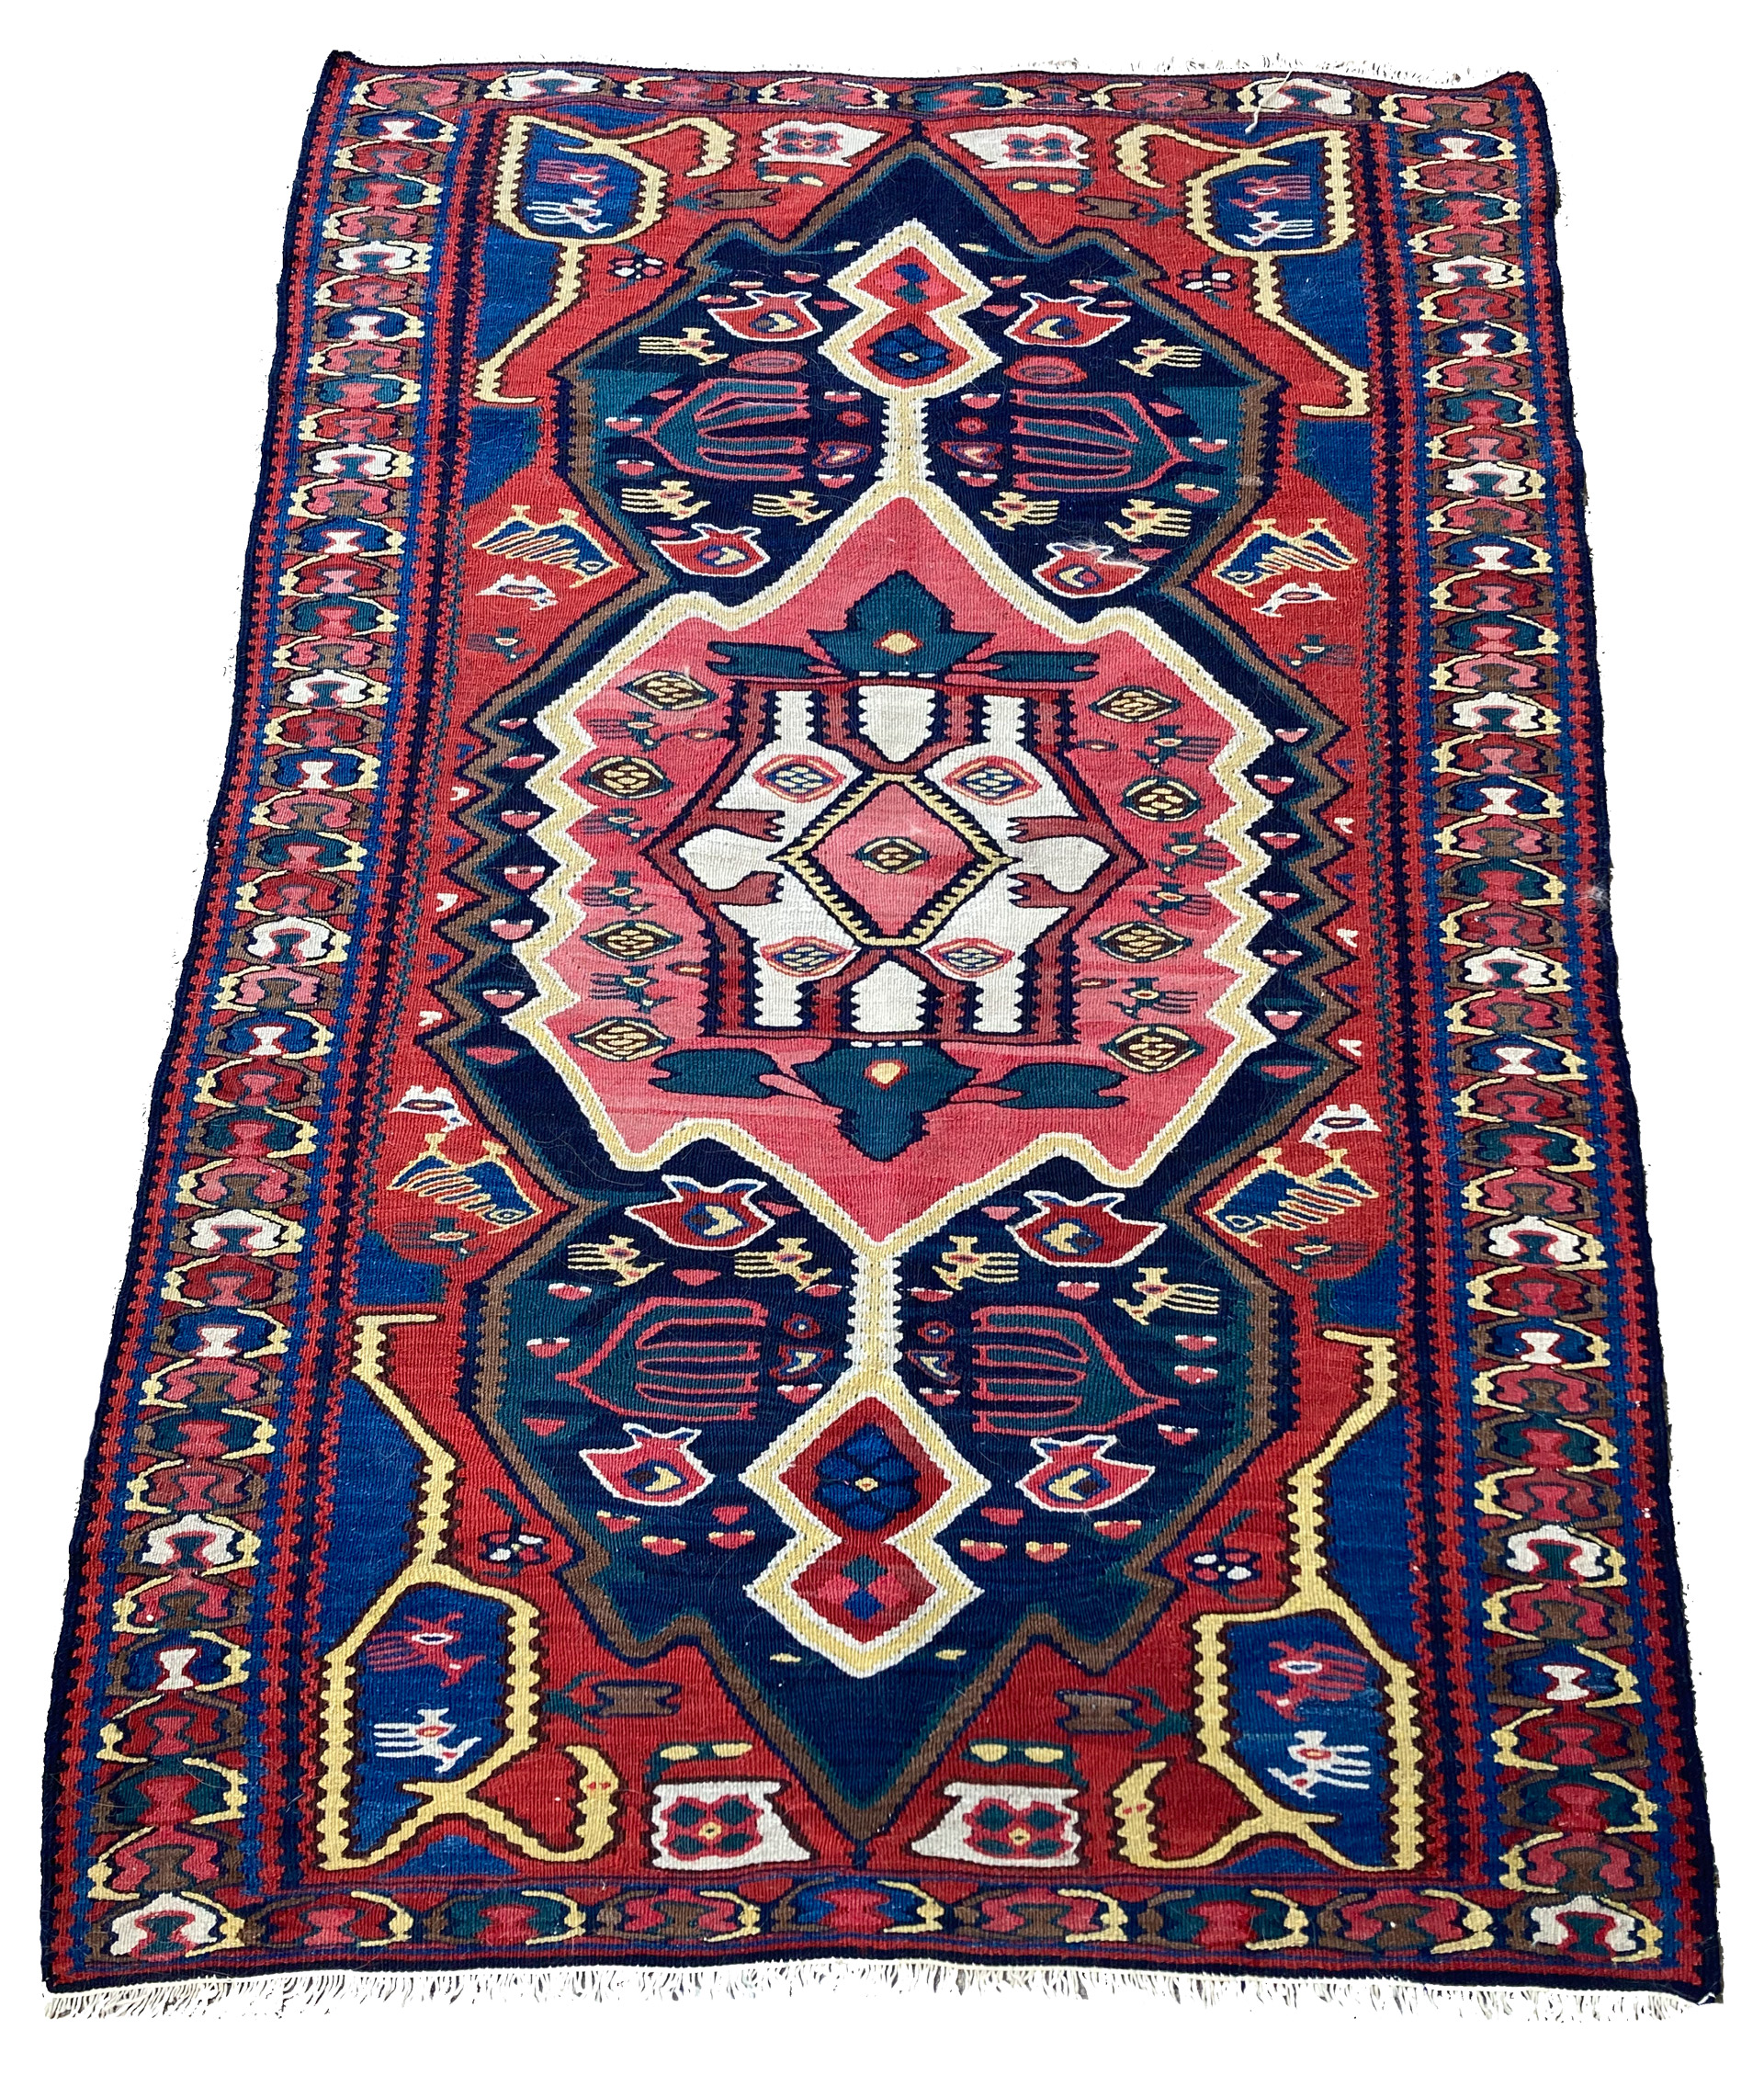 Antique Persian Bidjar kilim flat woven rug with a coral and ivory medallion on a navy field. Douglas Stock Gallery, antique Persian rugs, flat woven rugs, pile rugs, hand woven rugs Boston,MA area, antique rugs South Natick, Wellesley, Dover, Sherborn, Needham,MA area